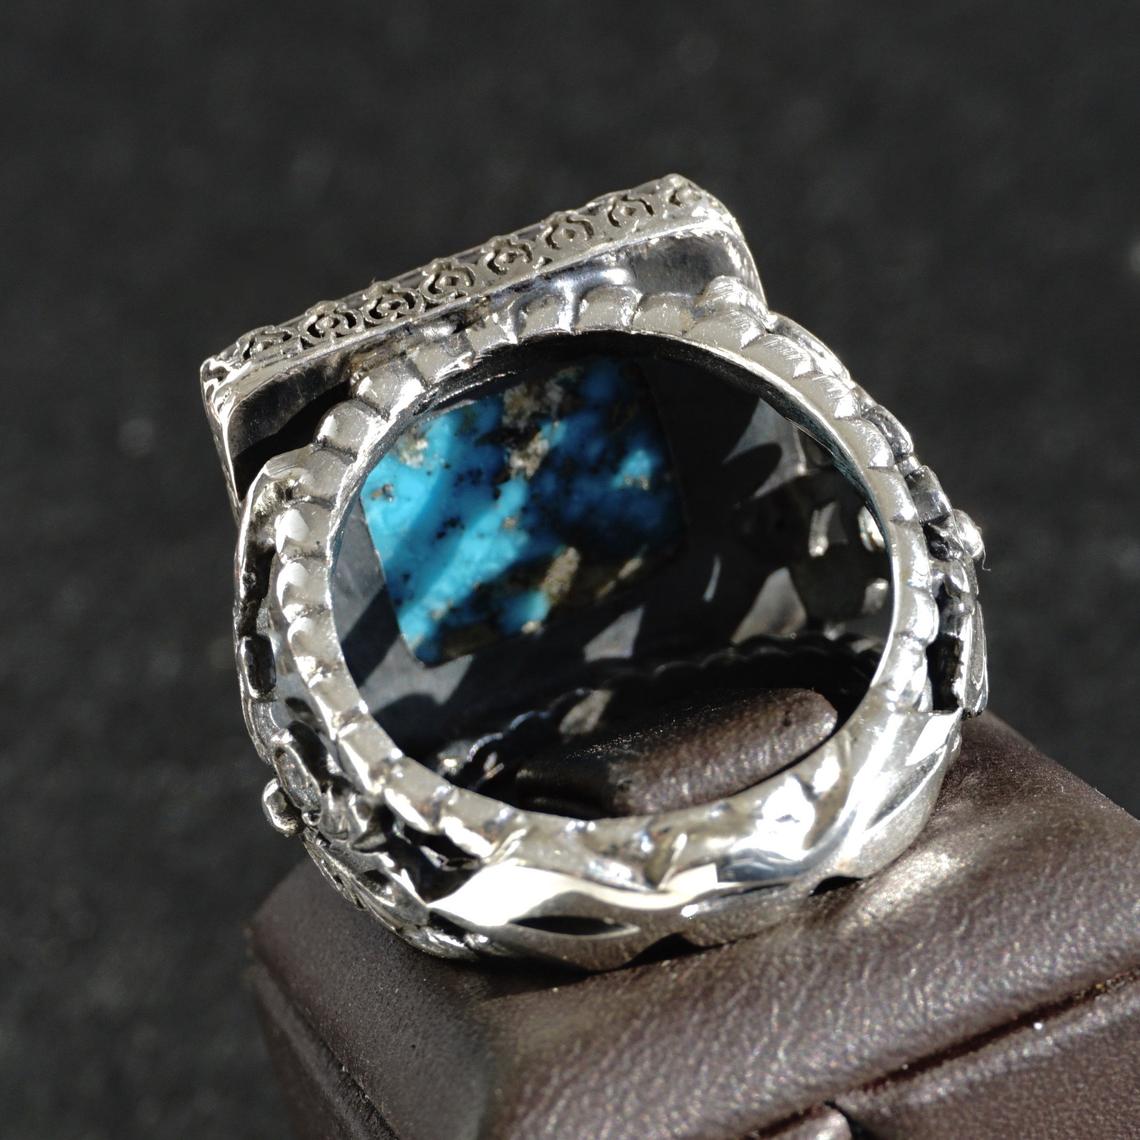 Turquoise Mens Ring Sterling Silver 925 Handmade Unique Artisan Jewelry